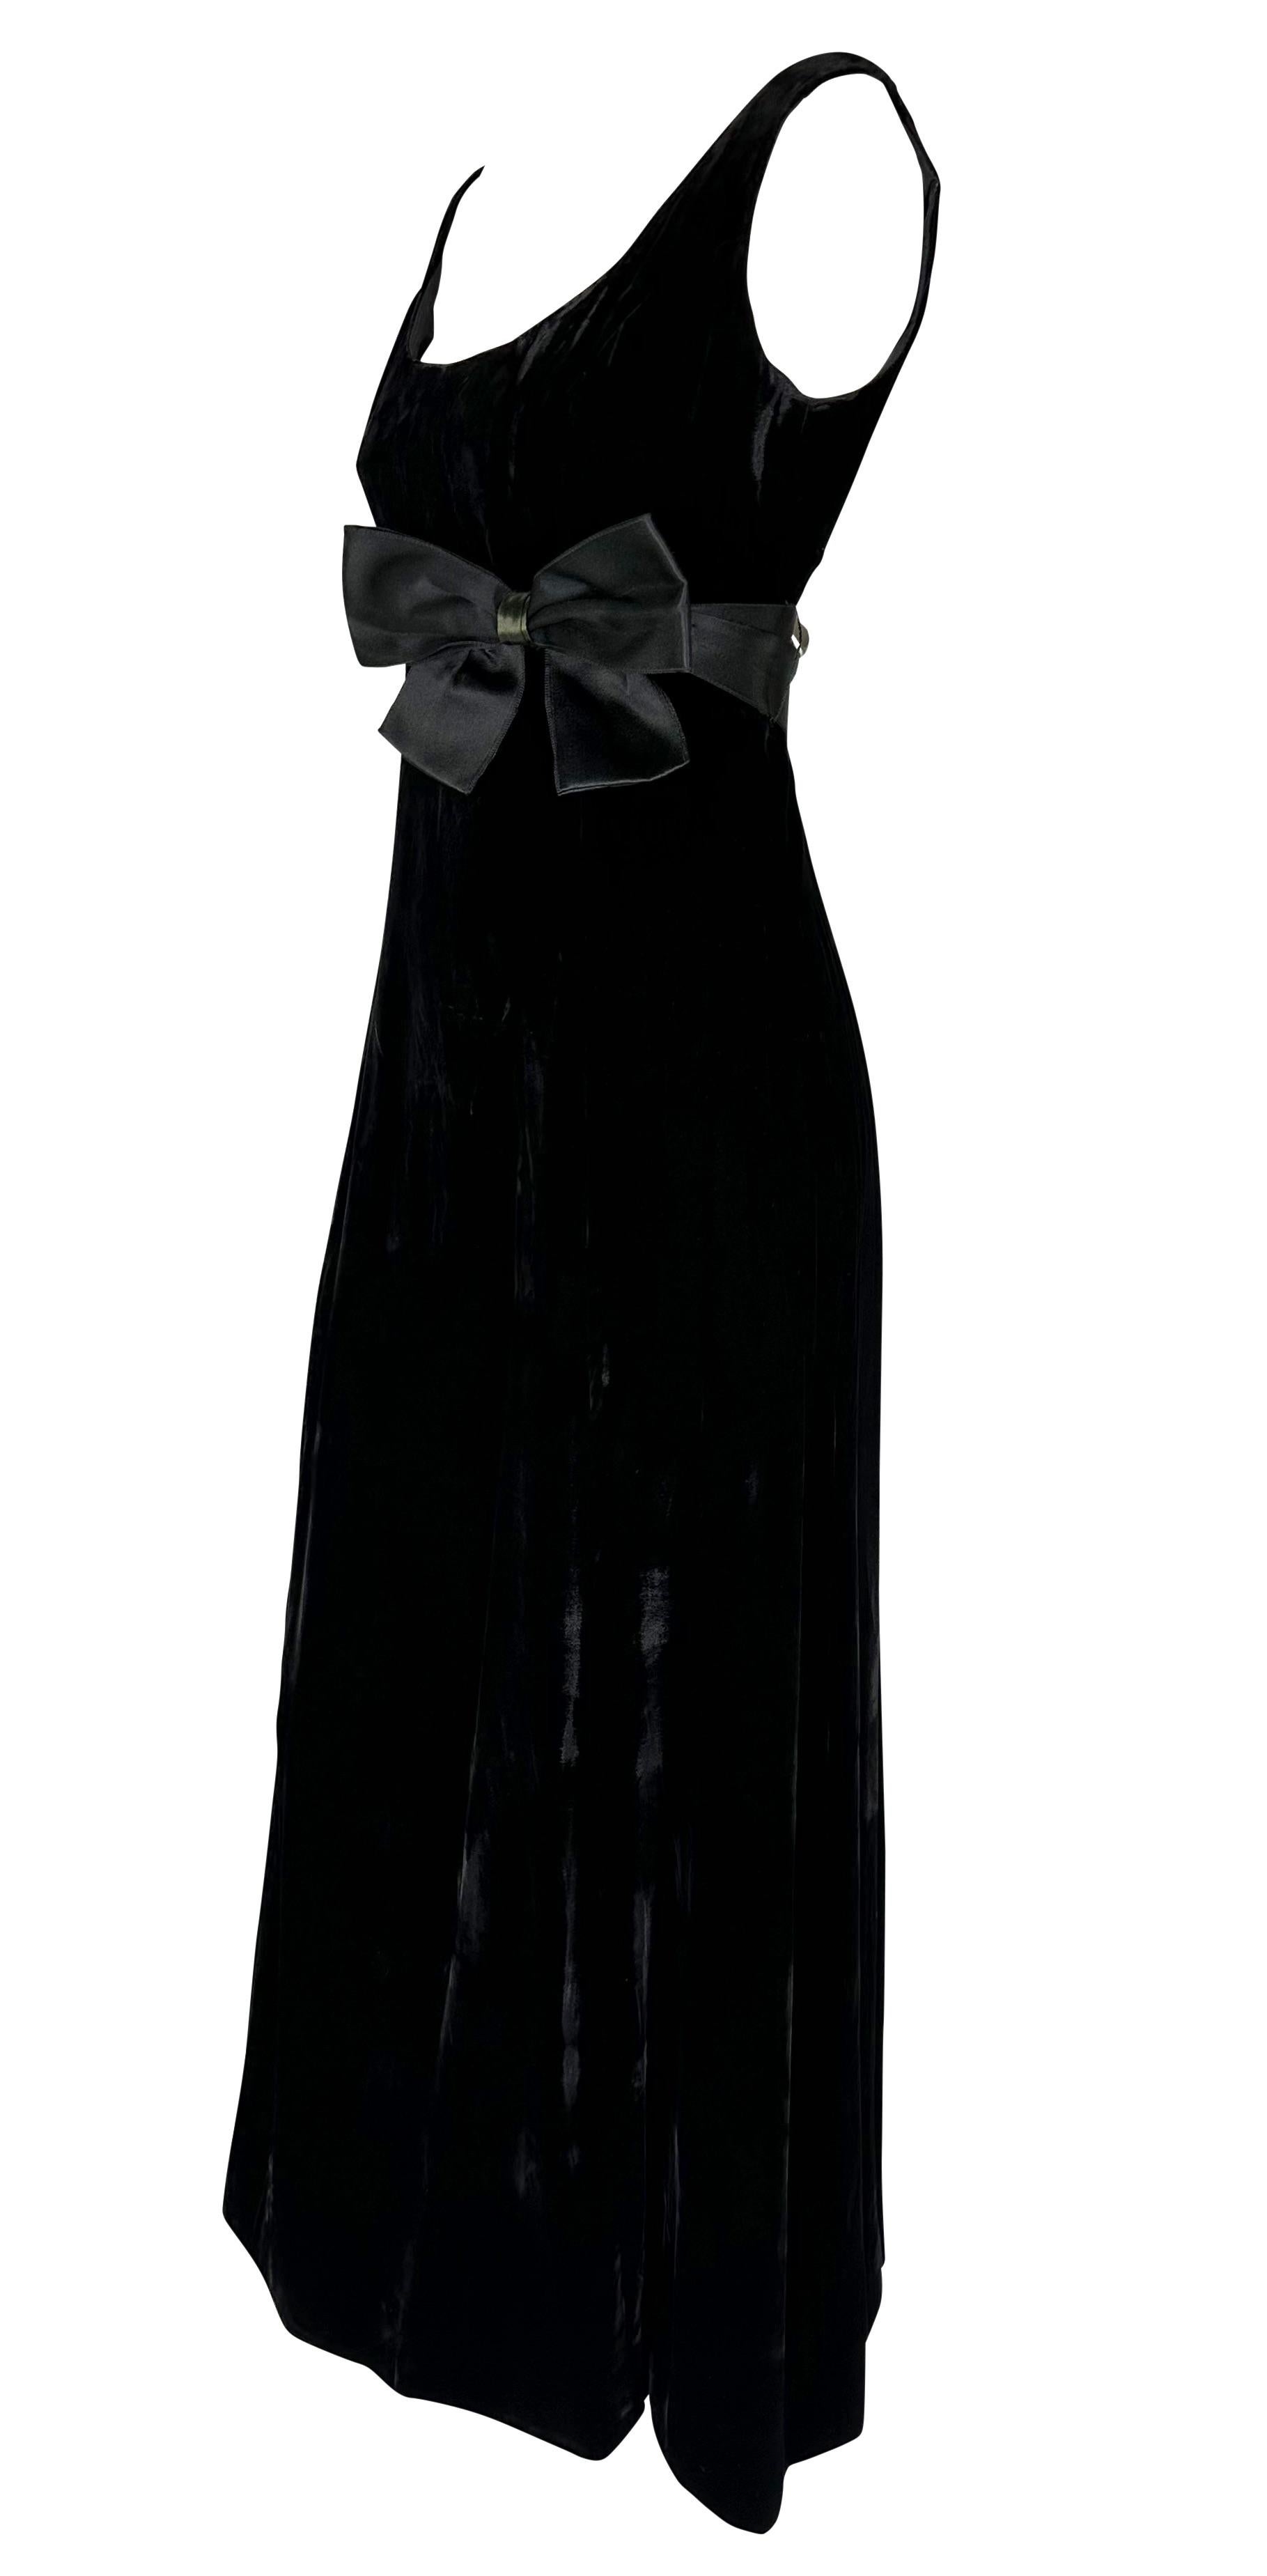 1990s Valentino Garavani Black Velvet Satin Bow Flare Sleeveless Evening Gown In Good Condition For Sale In West Hollywood, CA